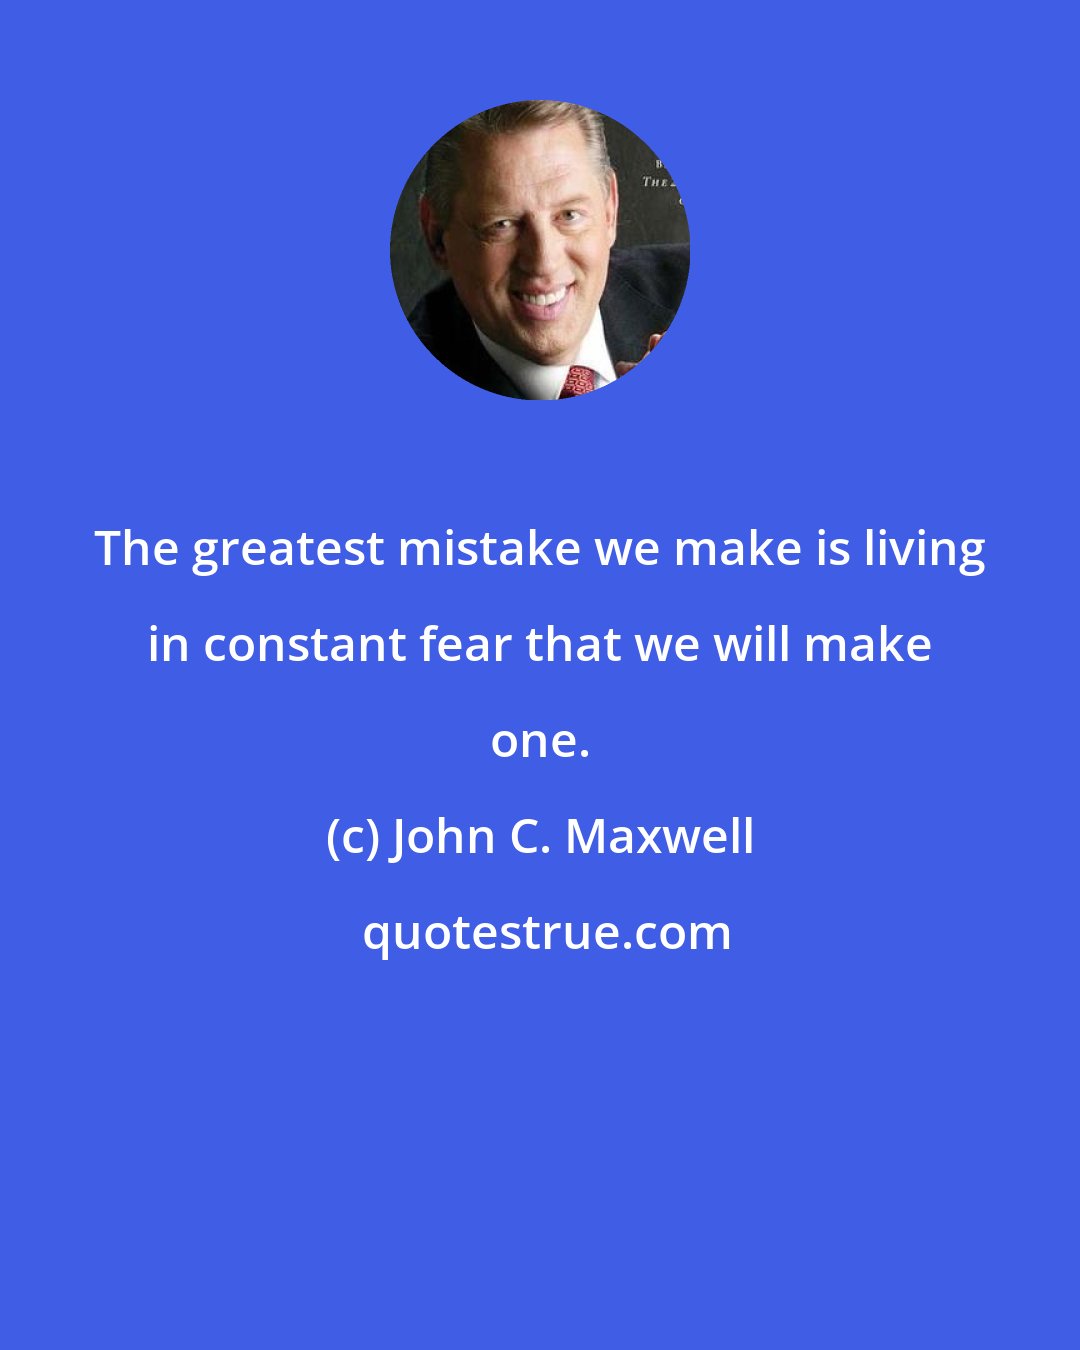 John C. Maxwell: The greatest mistake we make is living in constant fear that we will make one.